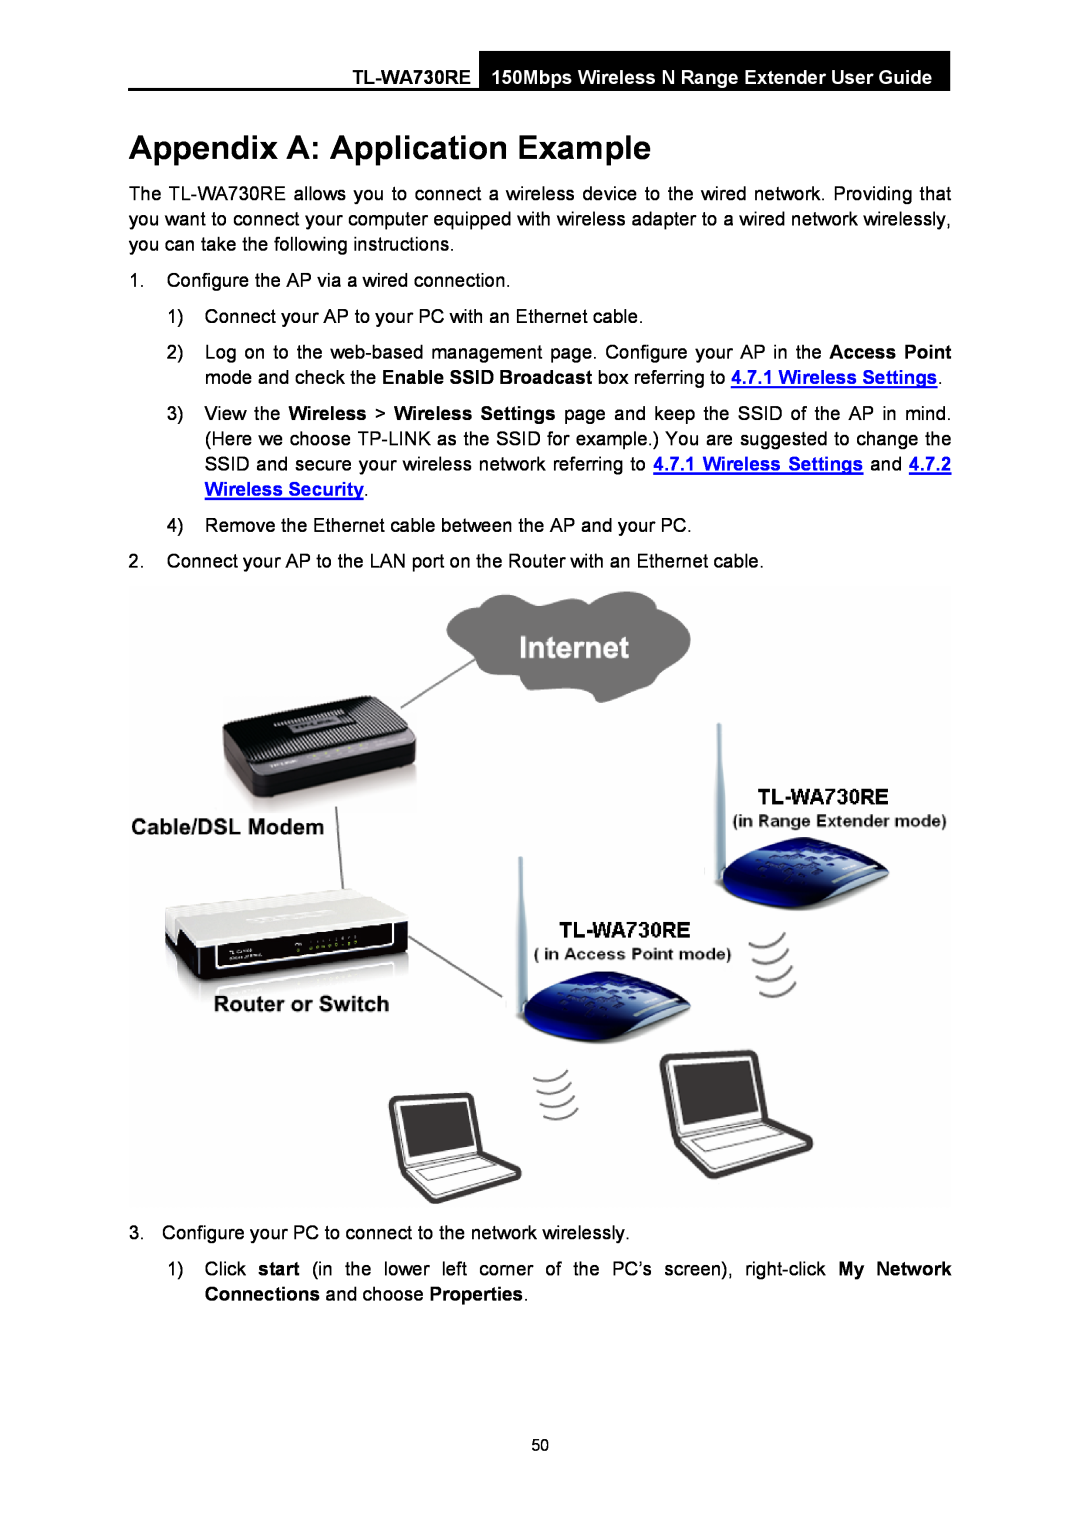 TP-Link manual Appendix A Application Example, TL-WA730RE 150Mbps Wireless N Range Extender User Guide 